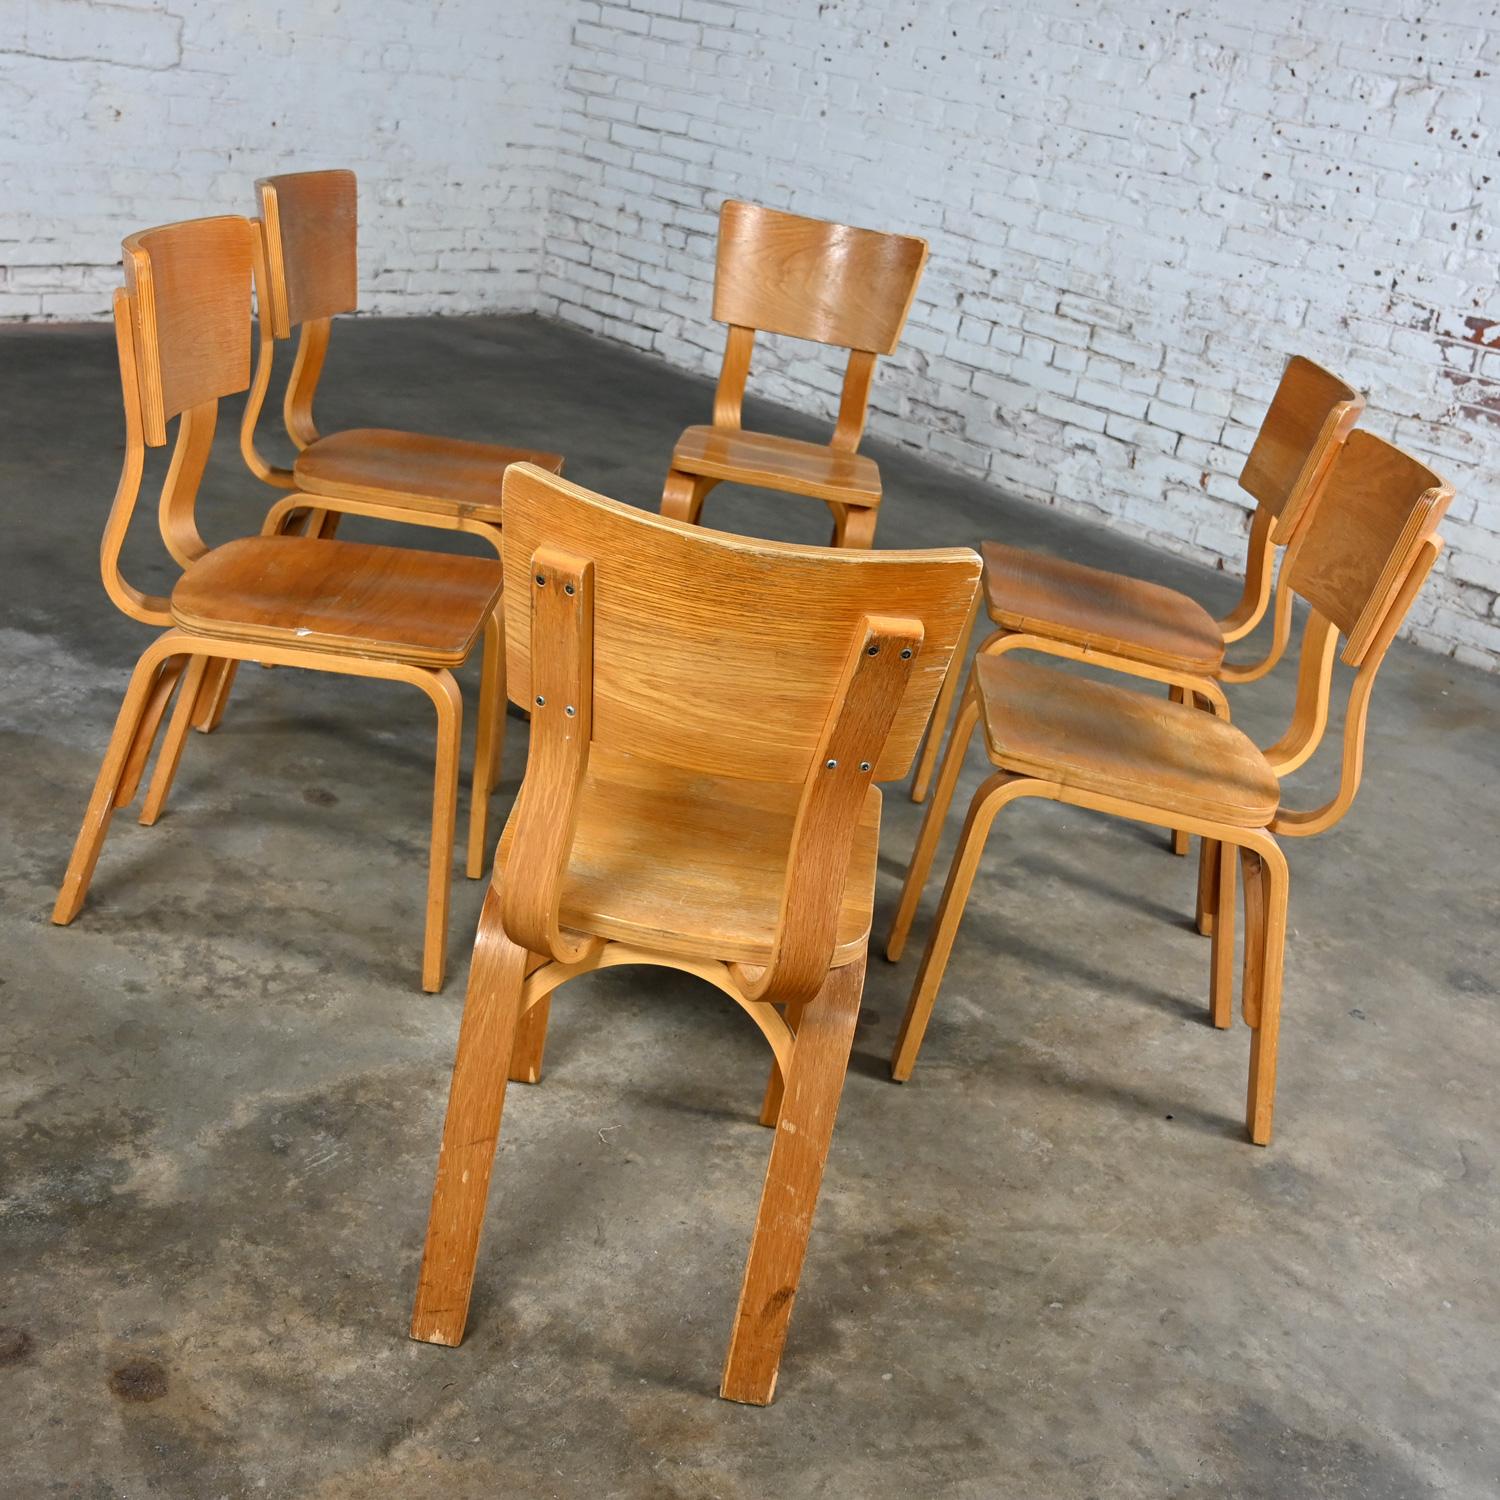 Marvelous vintage Mid-Century Modern Thonet #1216-S17-B1 dining chairs comprised of bent oak plywood with saddle seats and a single bow back stretcher, set of 6, as is condition. Beautiful condition, keeping in mind that these are vintage and not